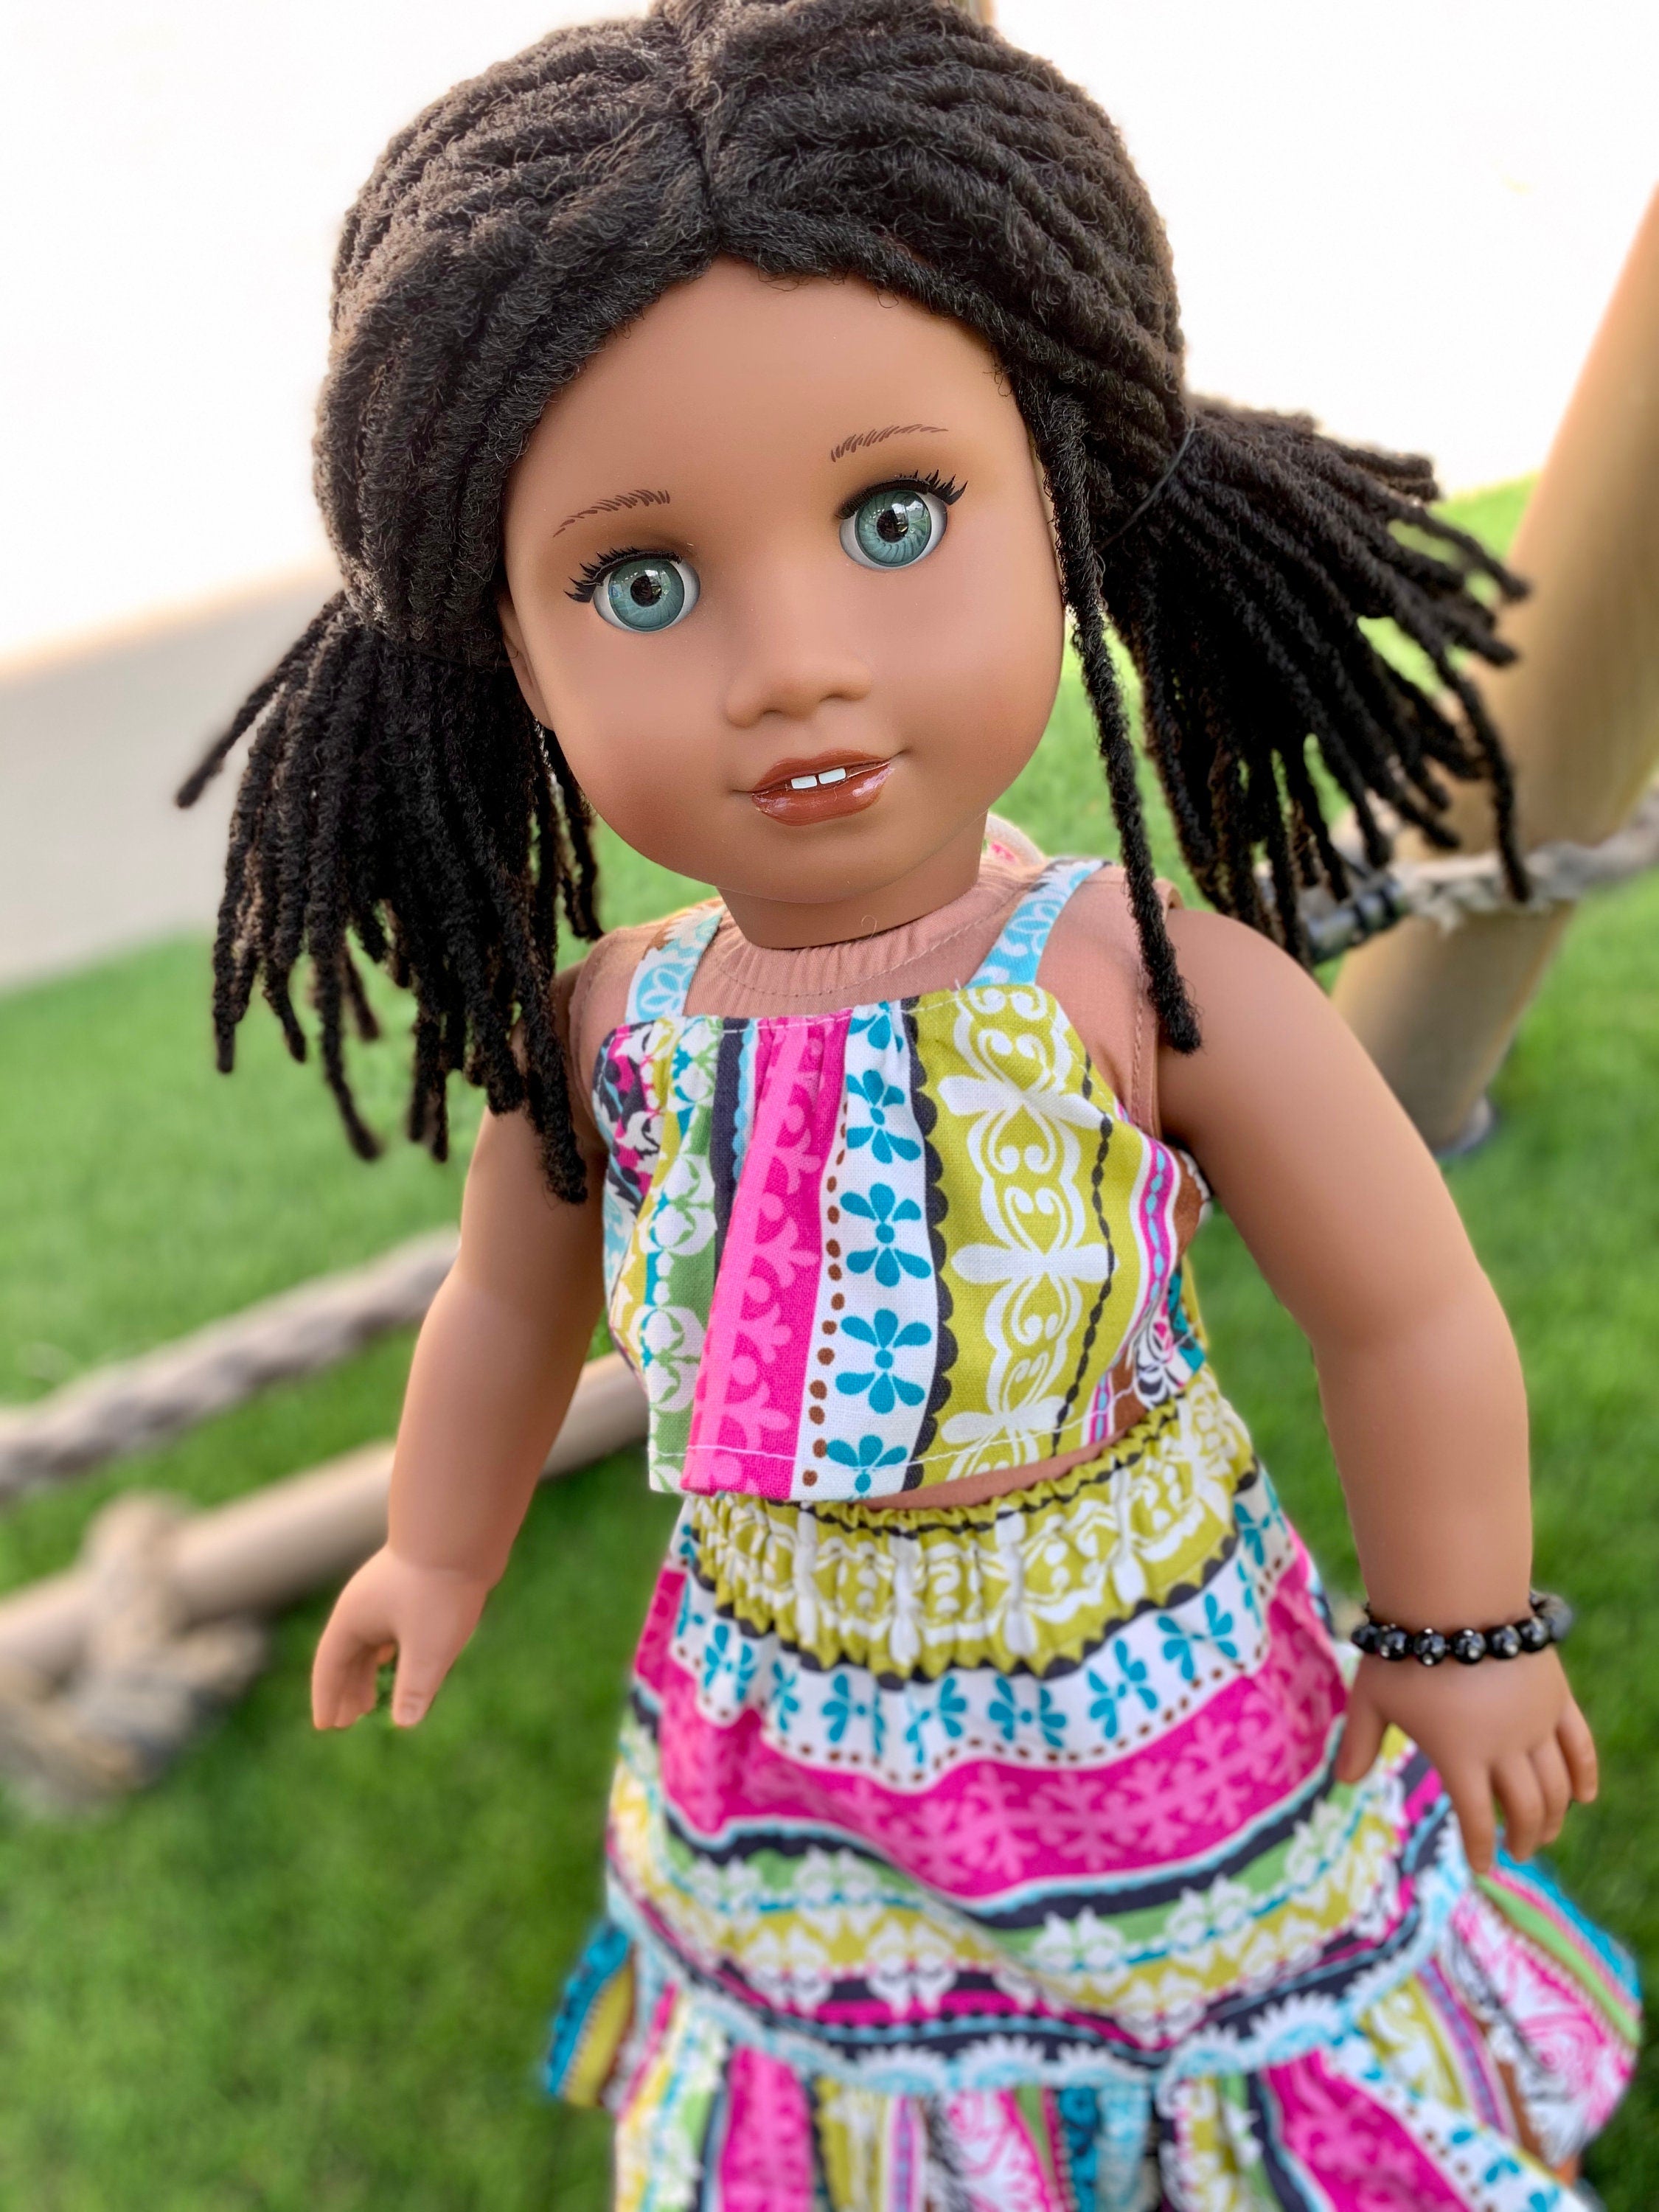 Custom doll wig for 18" American Girl Dolls-Heat Safe-Tangle Resistant-fits 10-11" head of 18" dolls  Journey AA black Marley locs